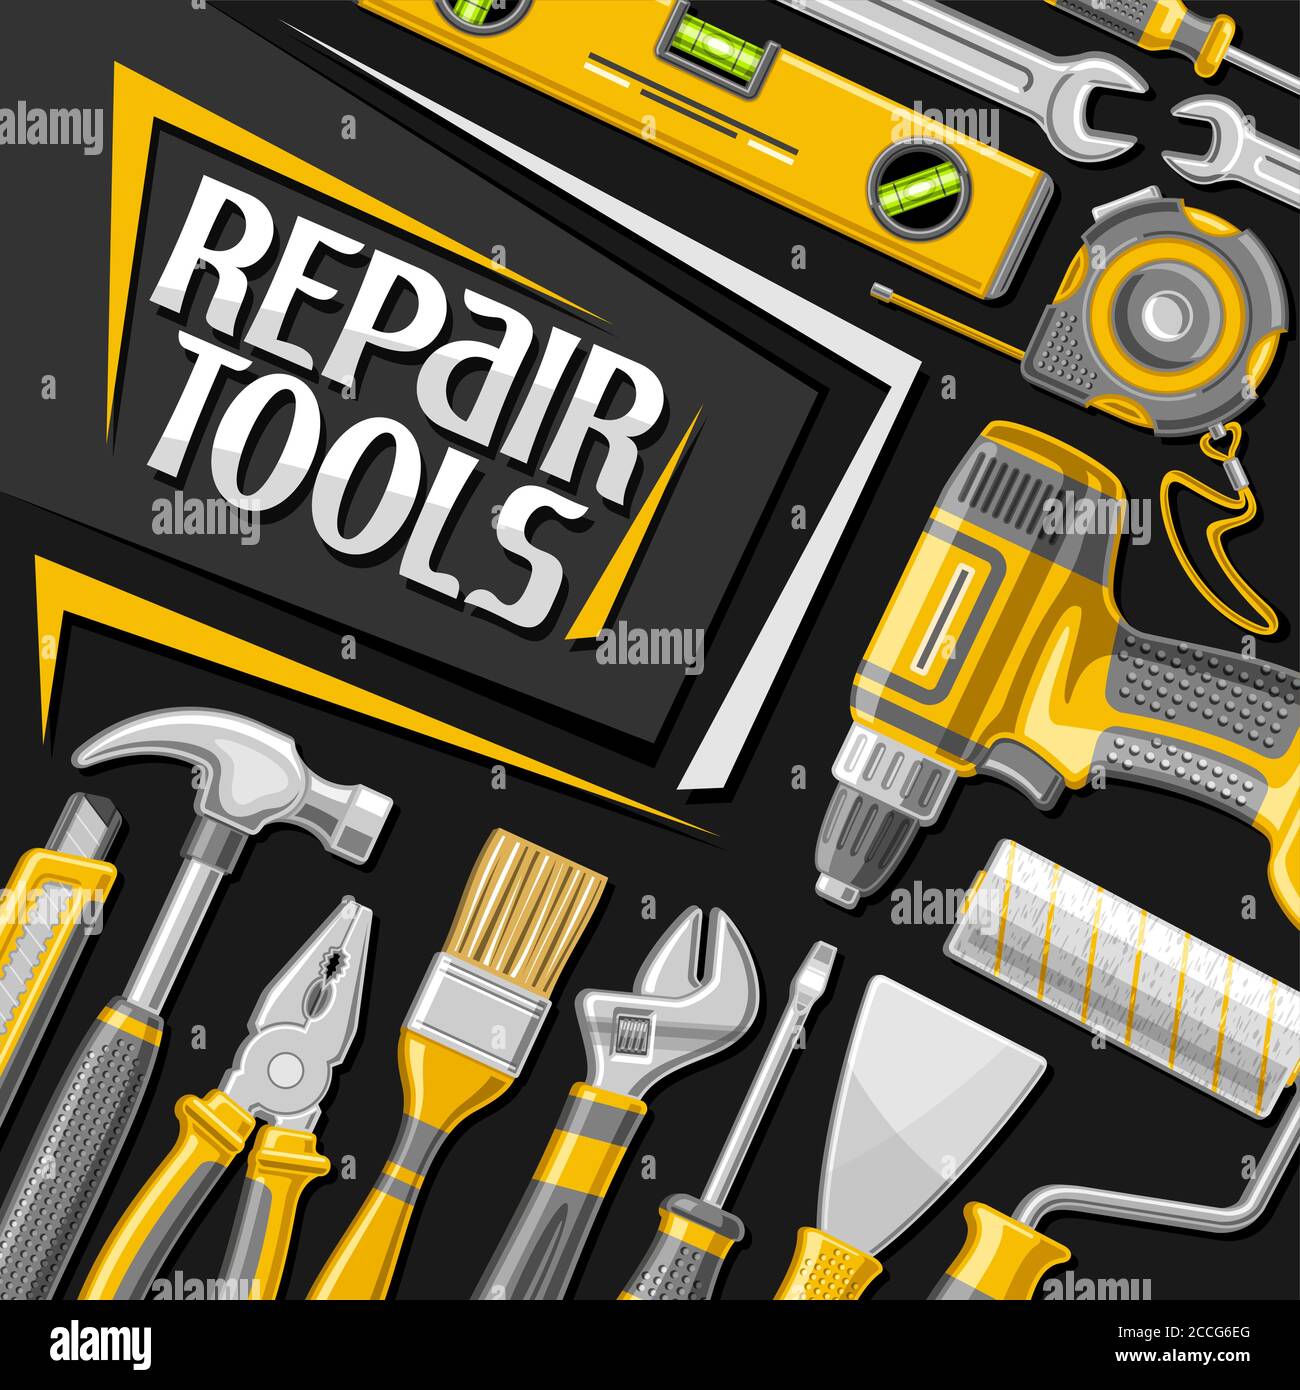 Vector poster for Repair Tools, square decorative sign board with illustration of various professional steel repair tools, art design concept with uni Stock Vector